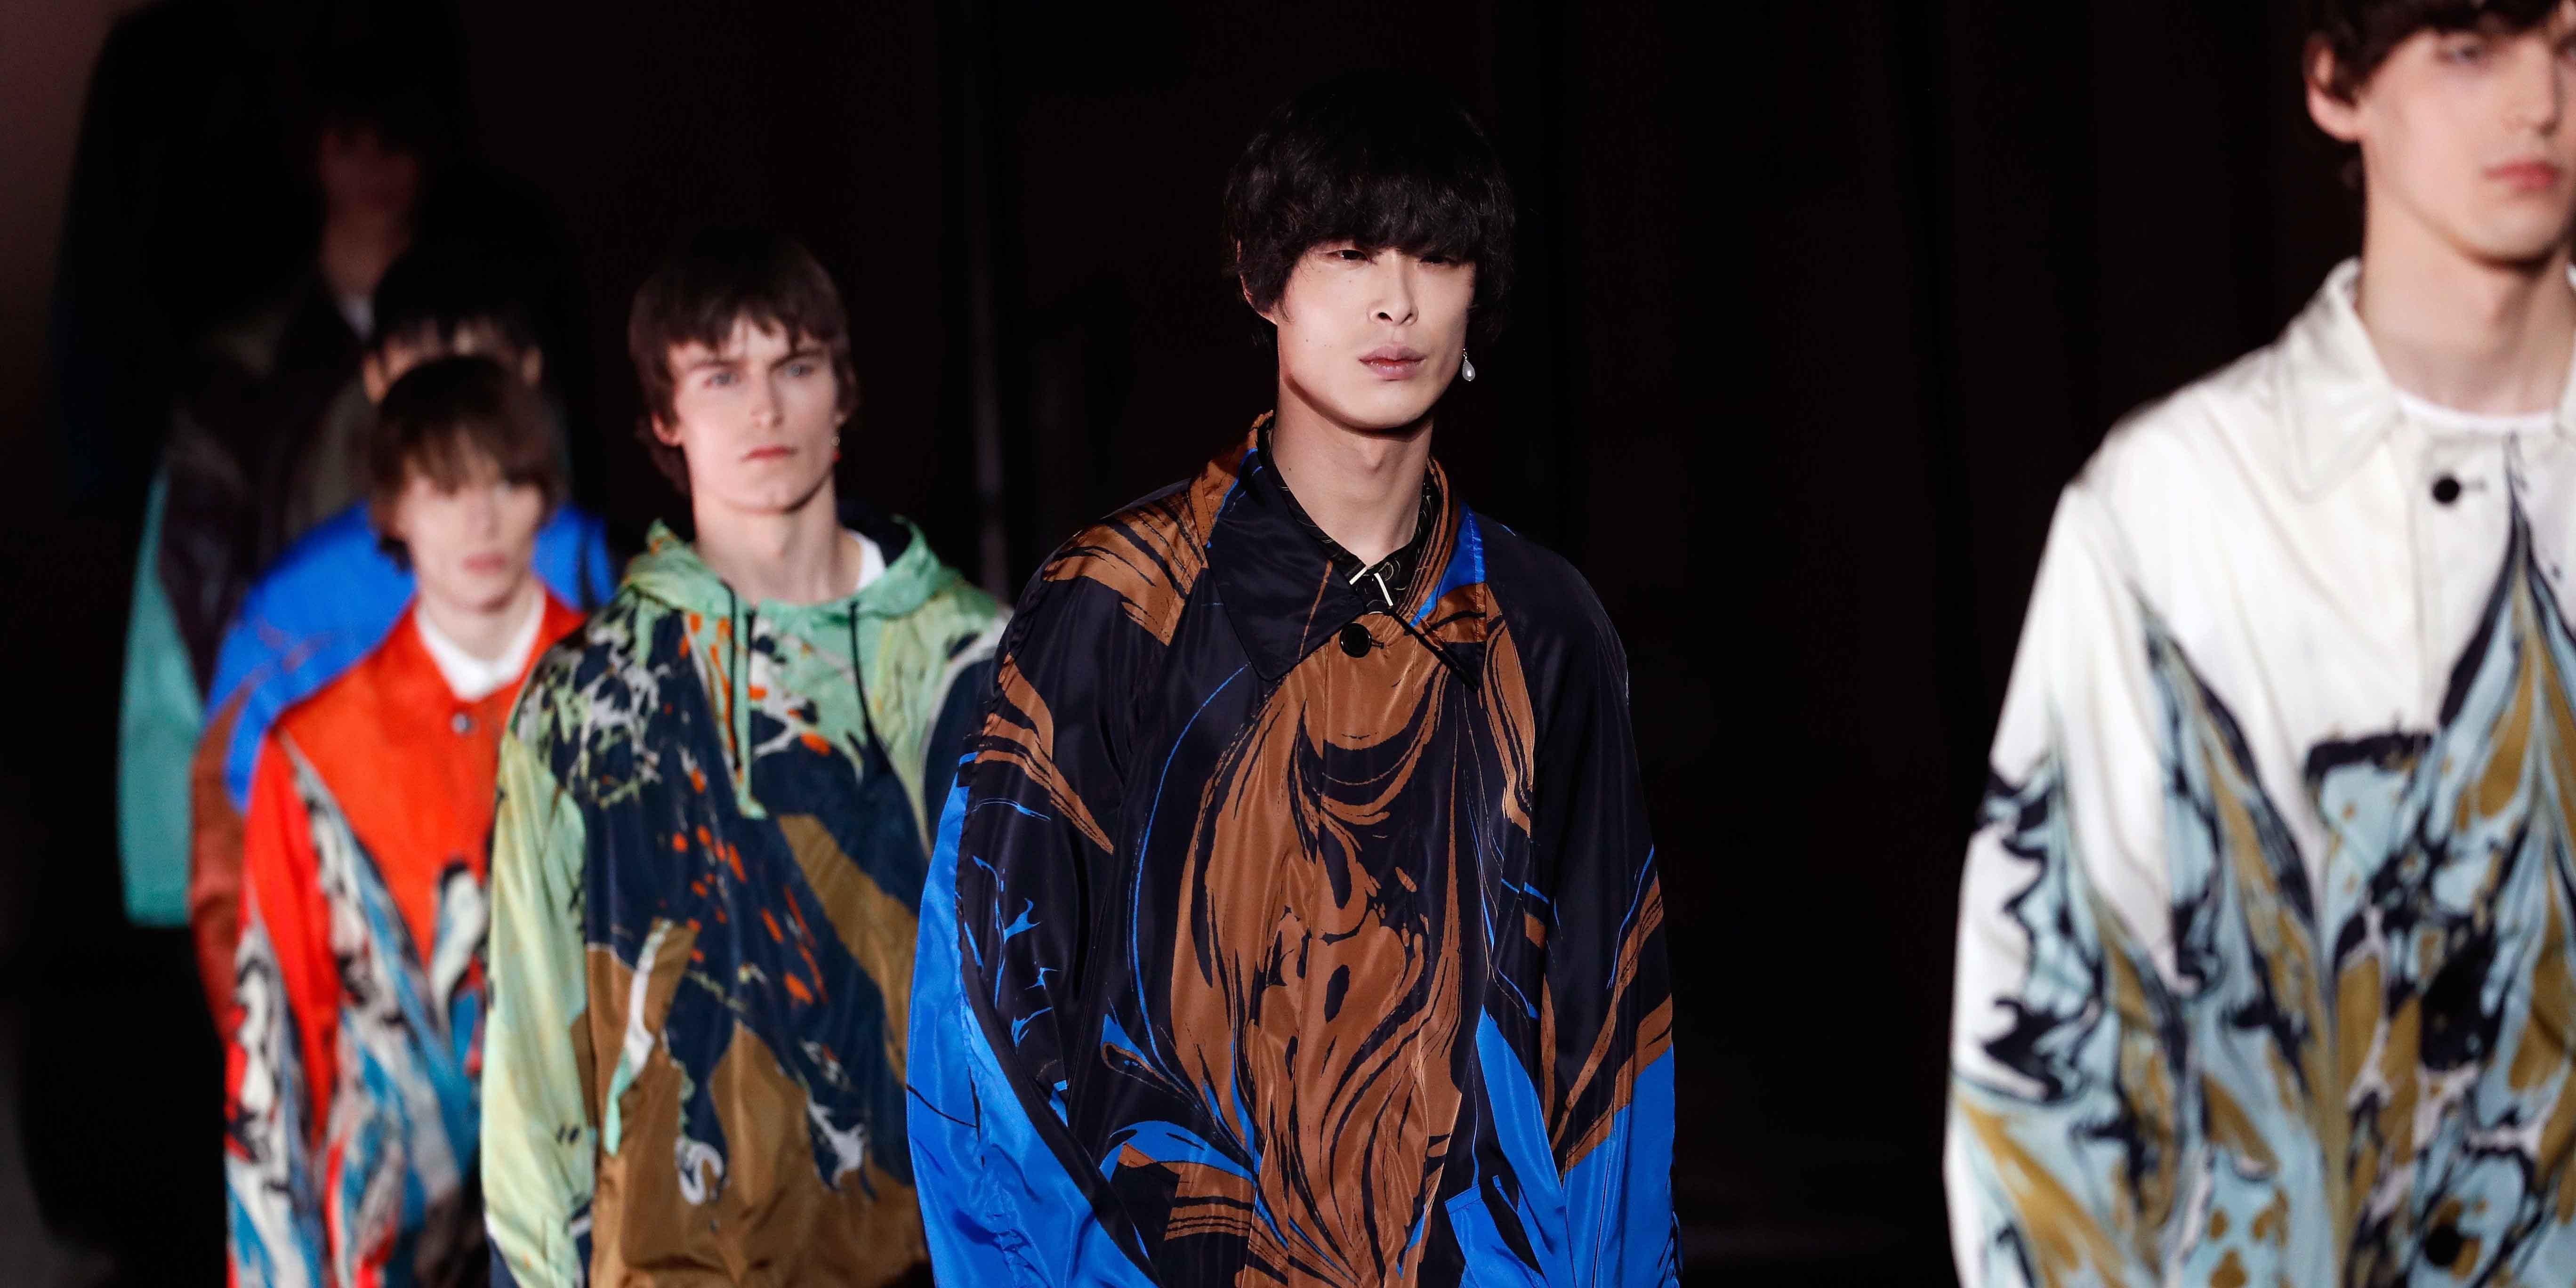 The Making of the Dries Van Noten Fall/Winter 2018 Prints